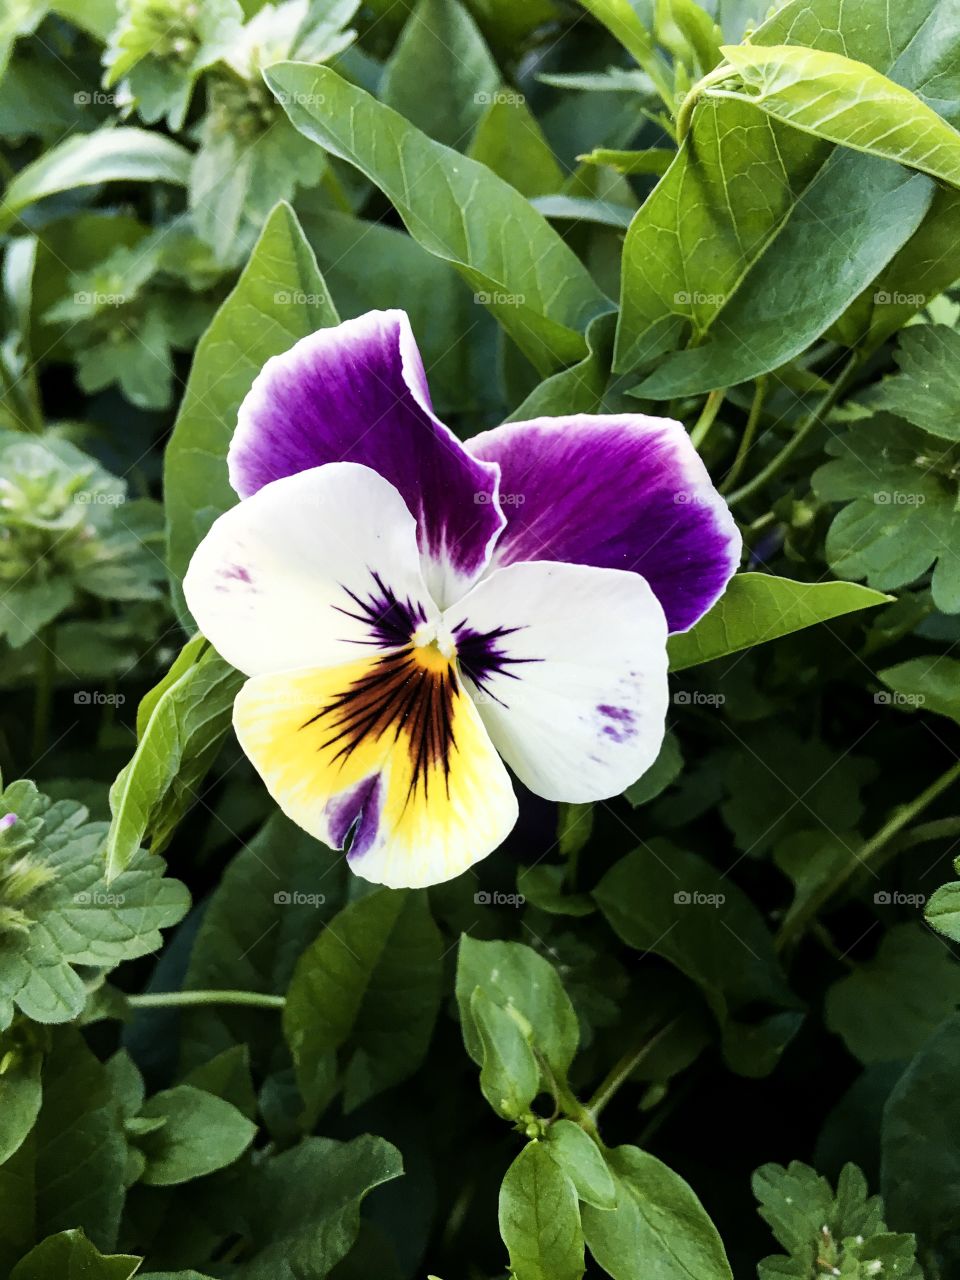 The summer gardening and blooming flowers background. The pansies flowers and green leaves texture. 